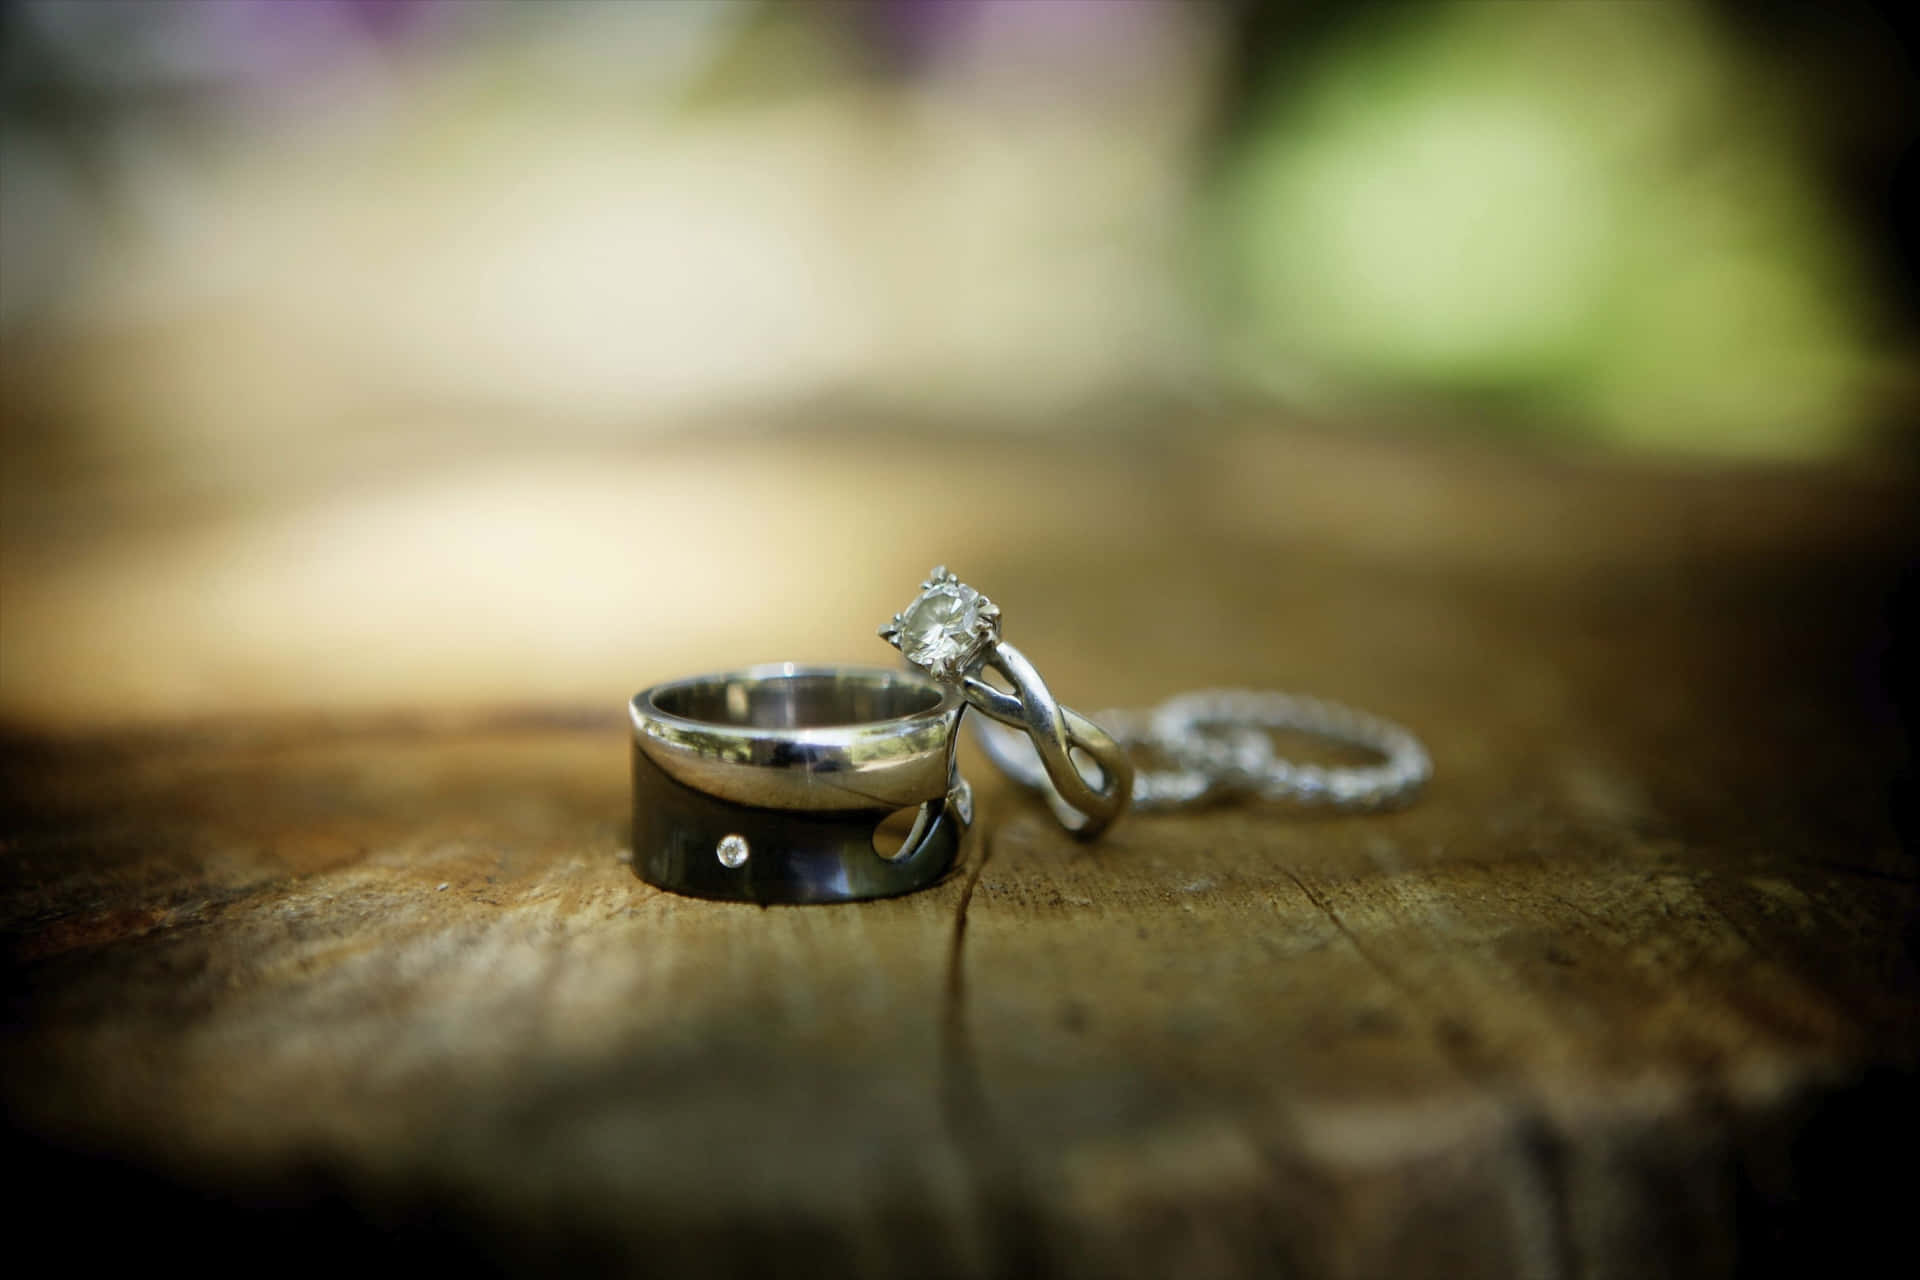 Wedding Rings - Get Ready to Seal Your Troublesome Tomorrows